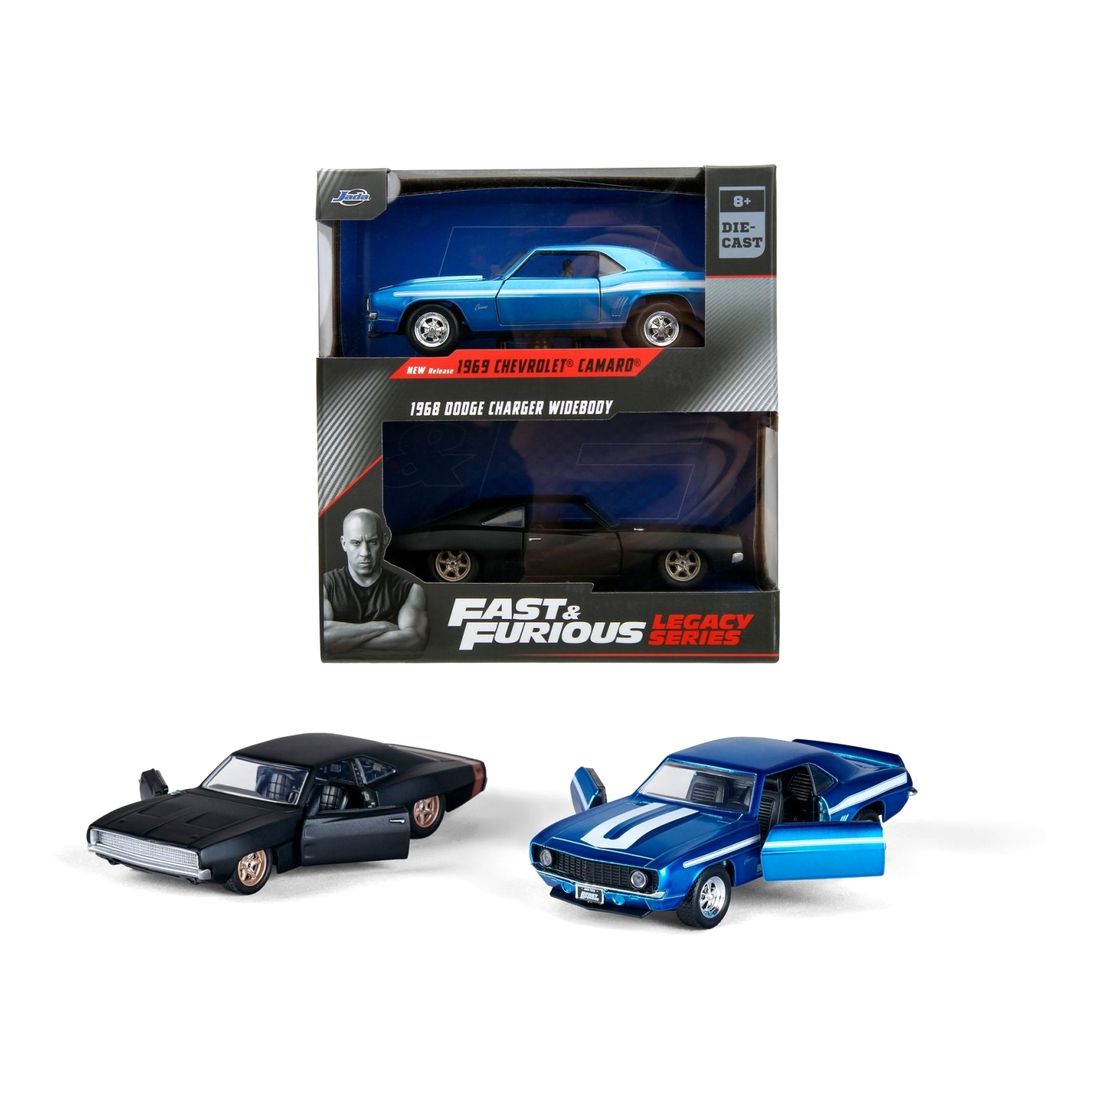 Jada Toys Fast & Furious Legacy Series 1969 Chevrolet Camaro And 1968 Dodge Charger Widebody 1.32 Diecast Model Car (Pack of 2)